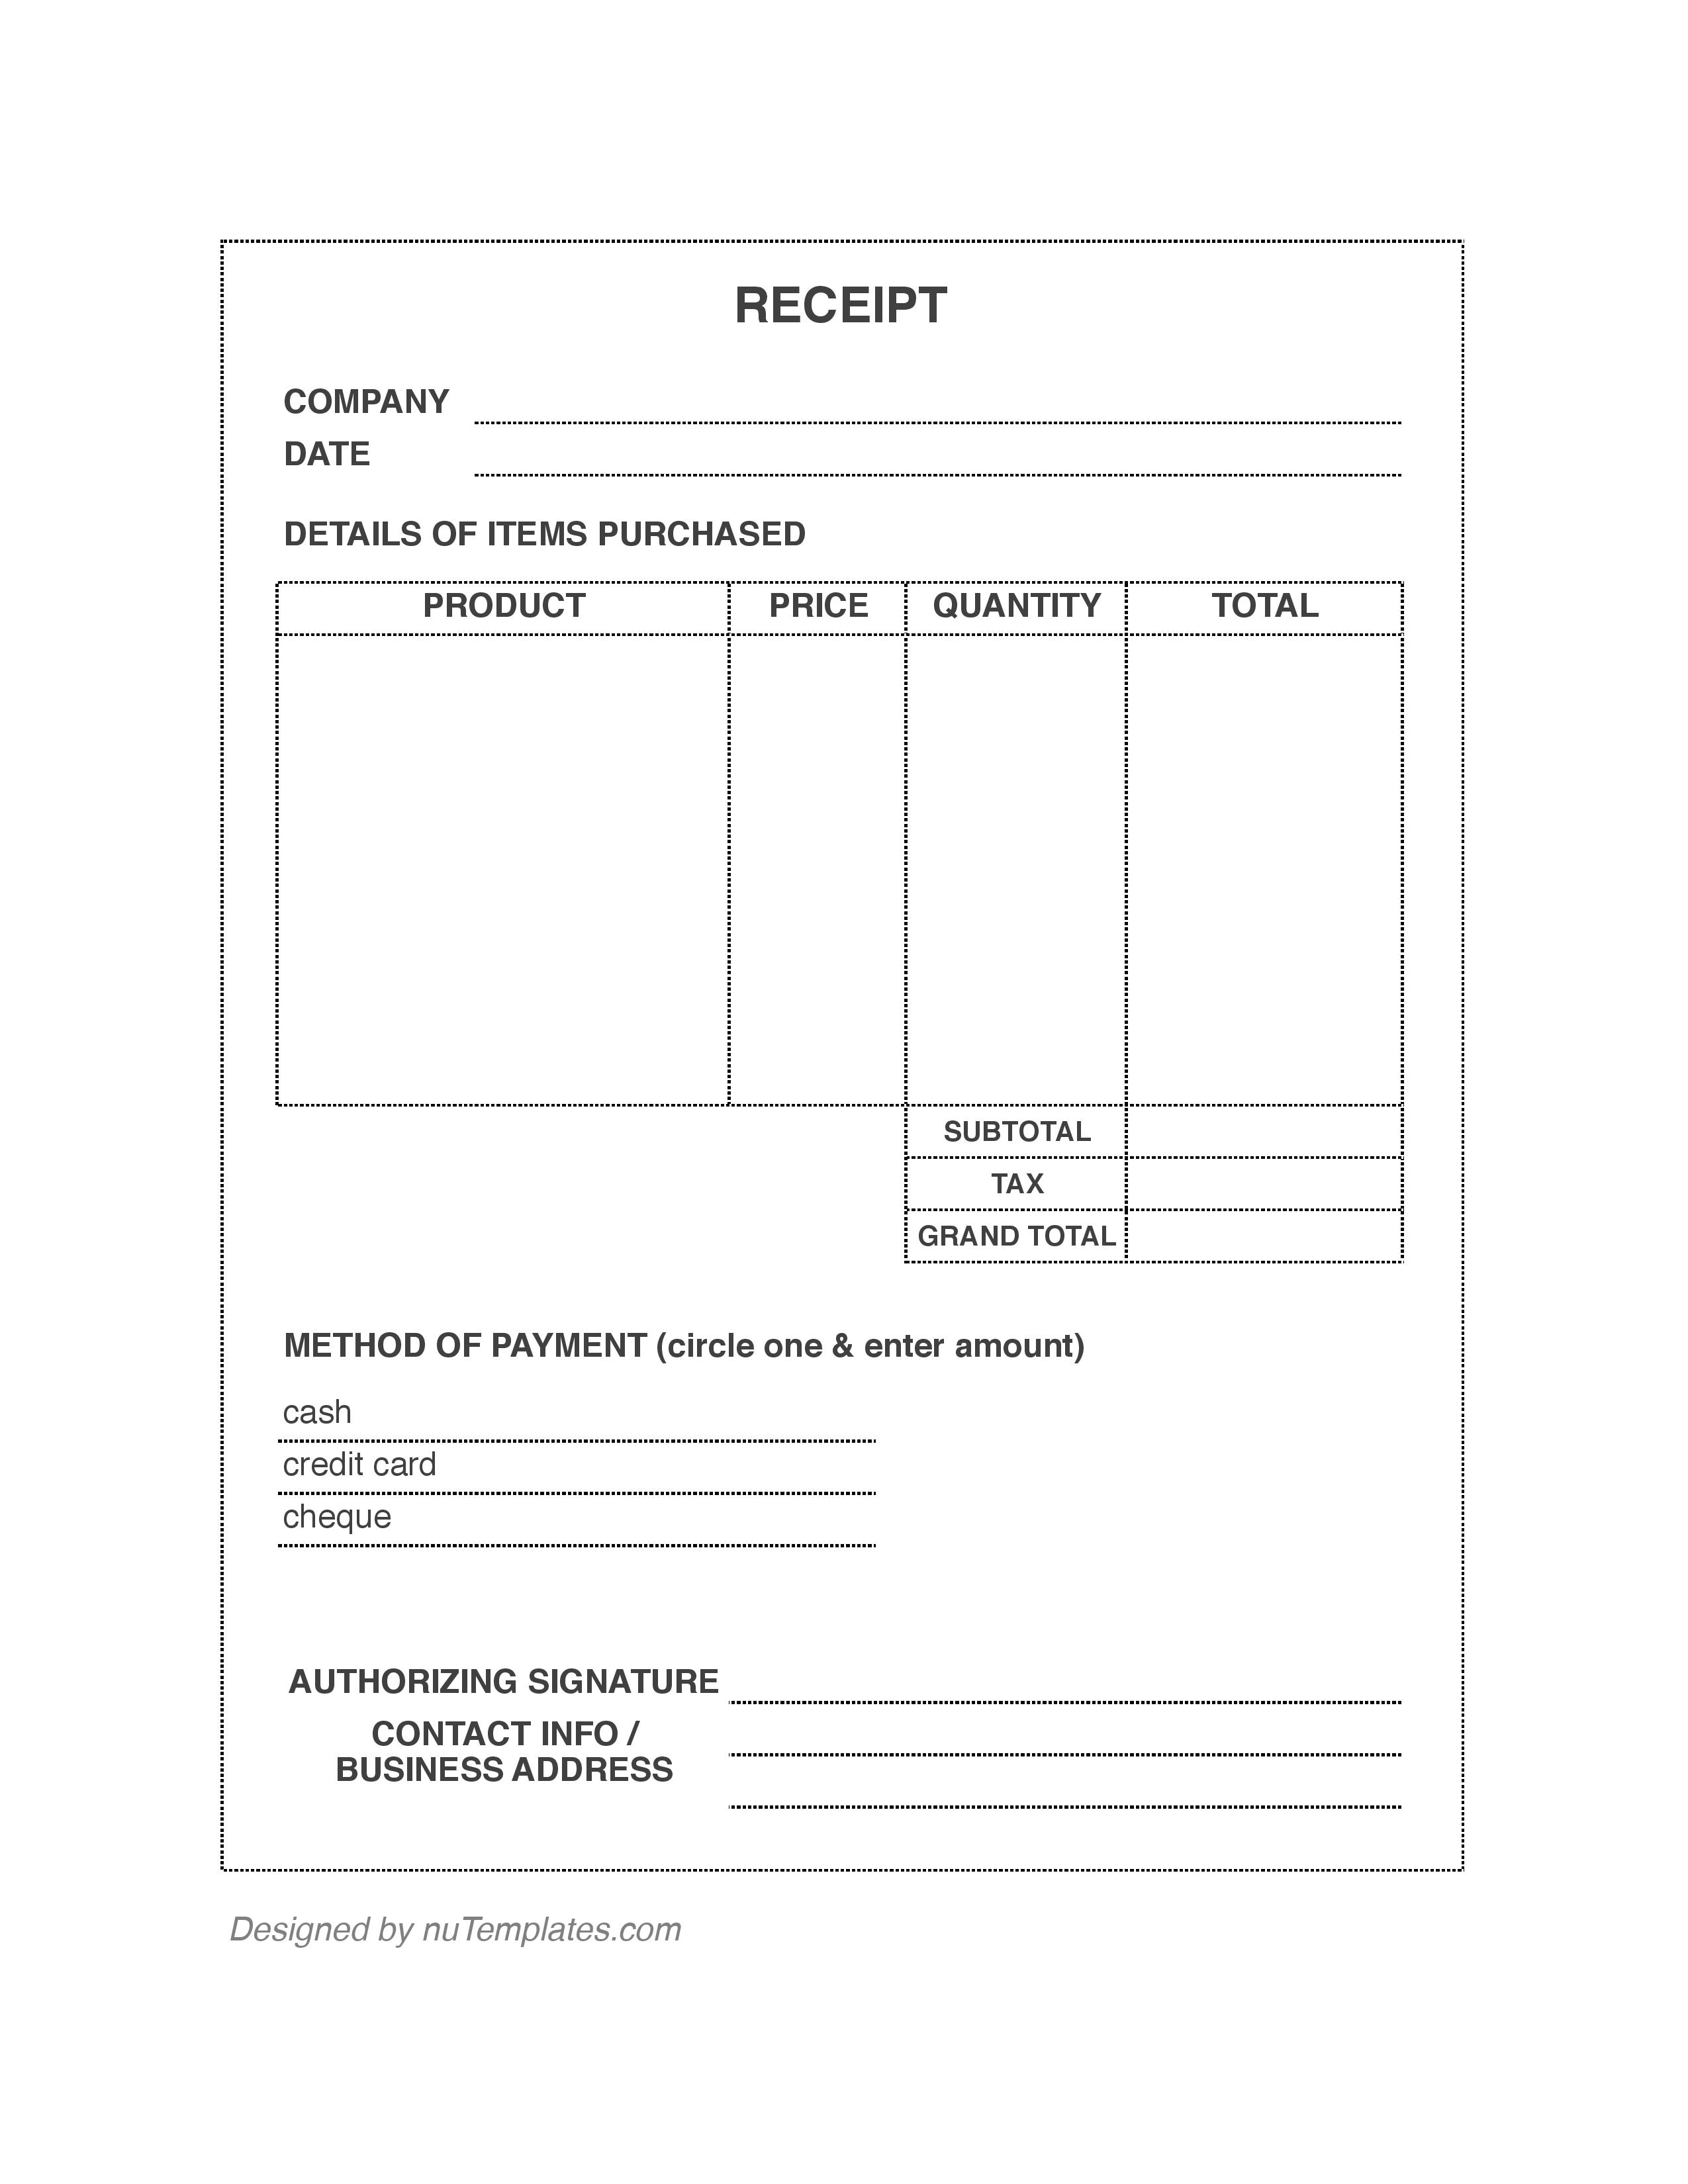 50 Receipt Samples Format And Examples 2023